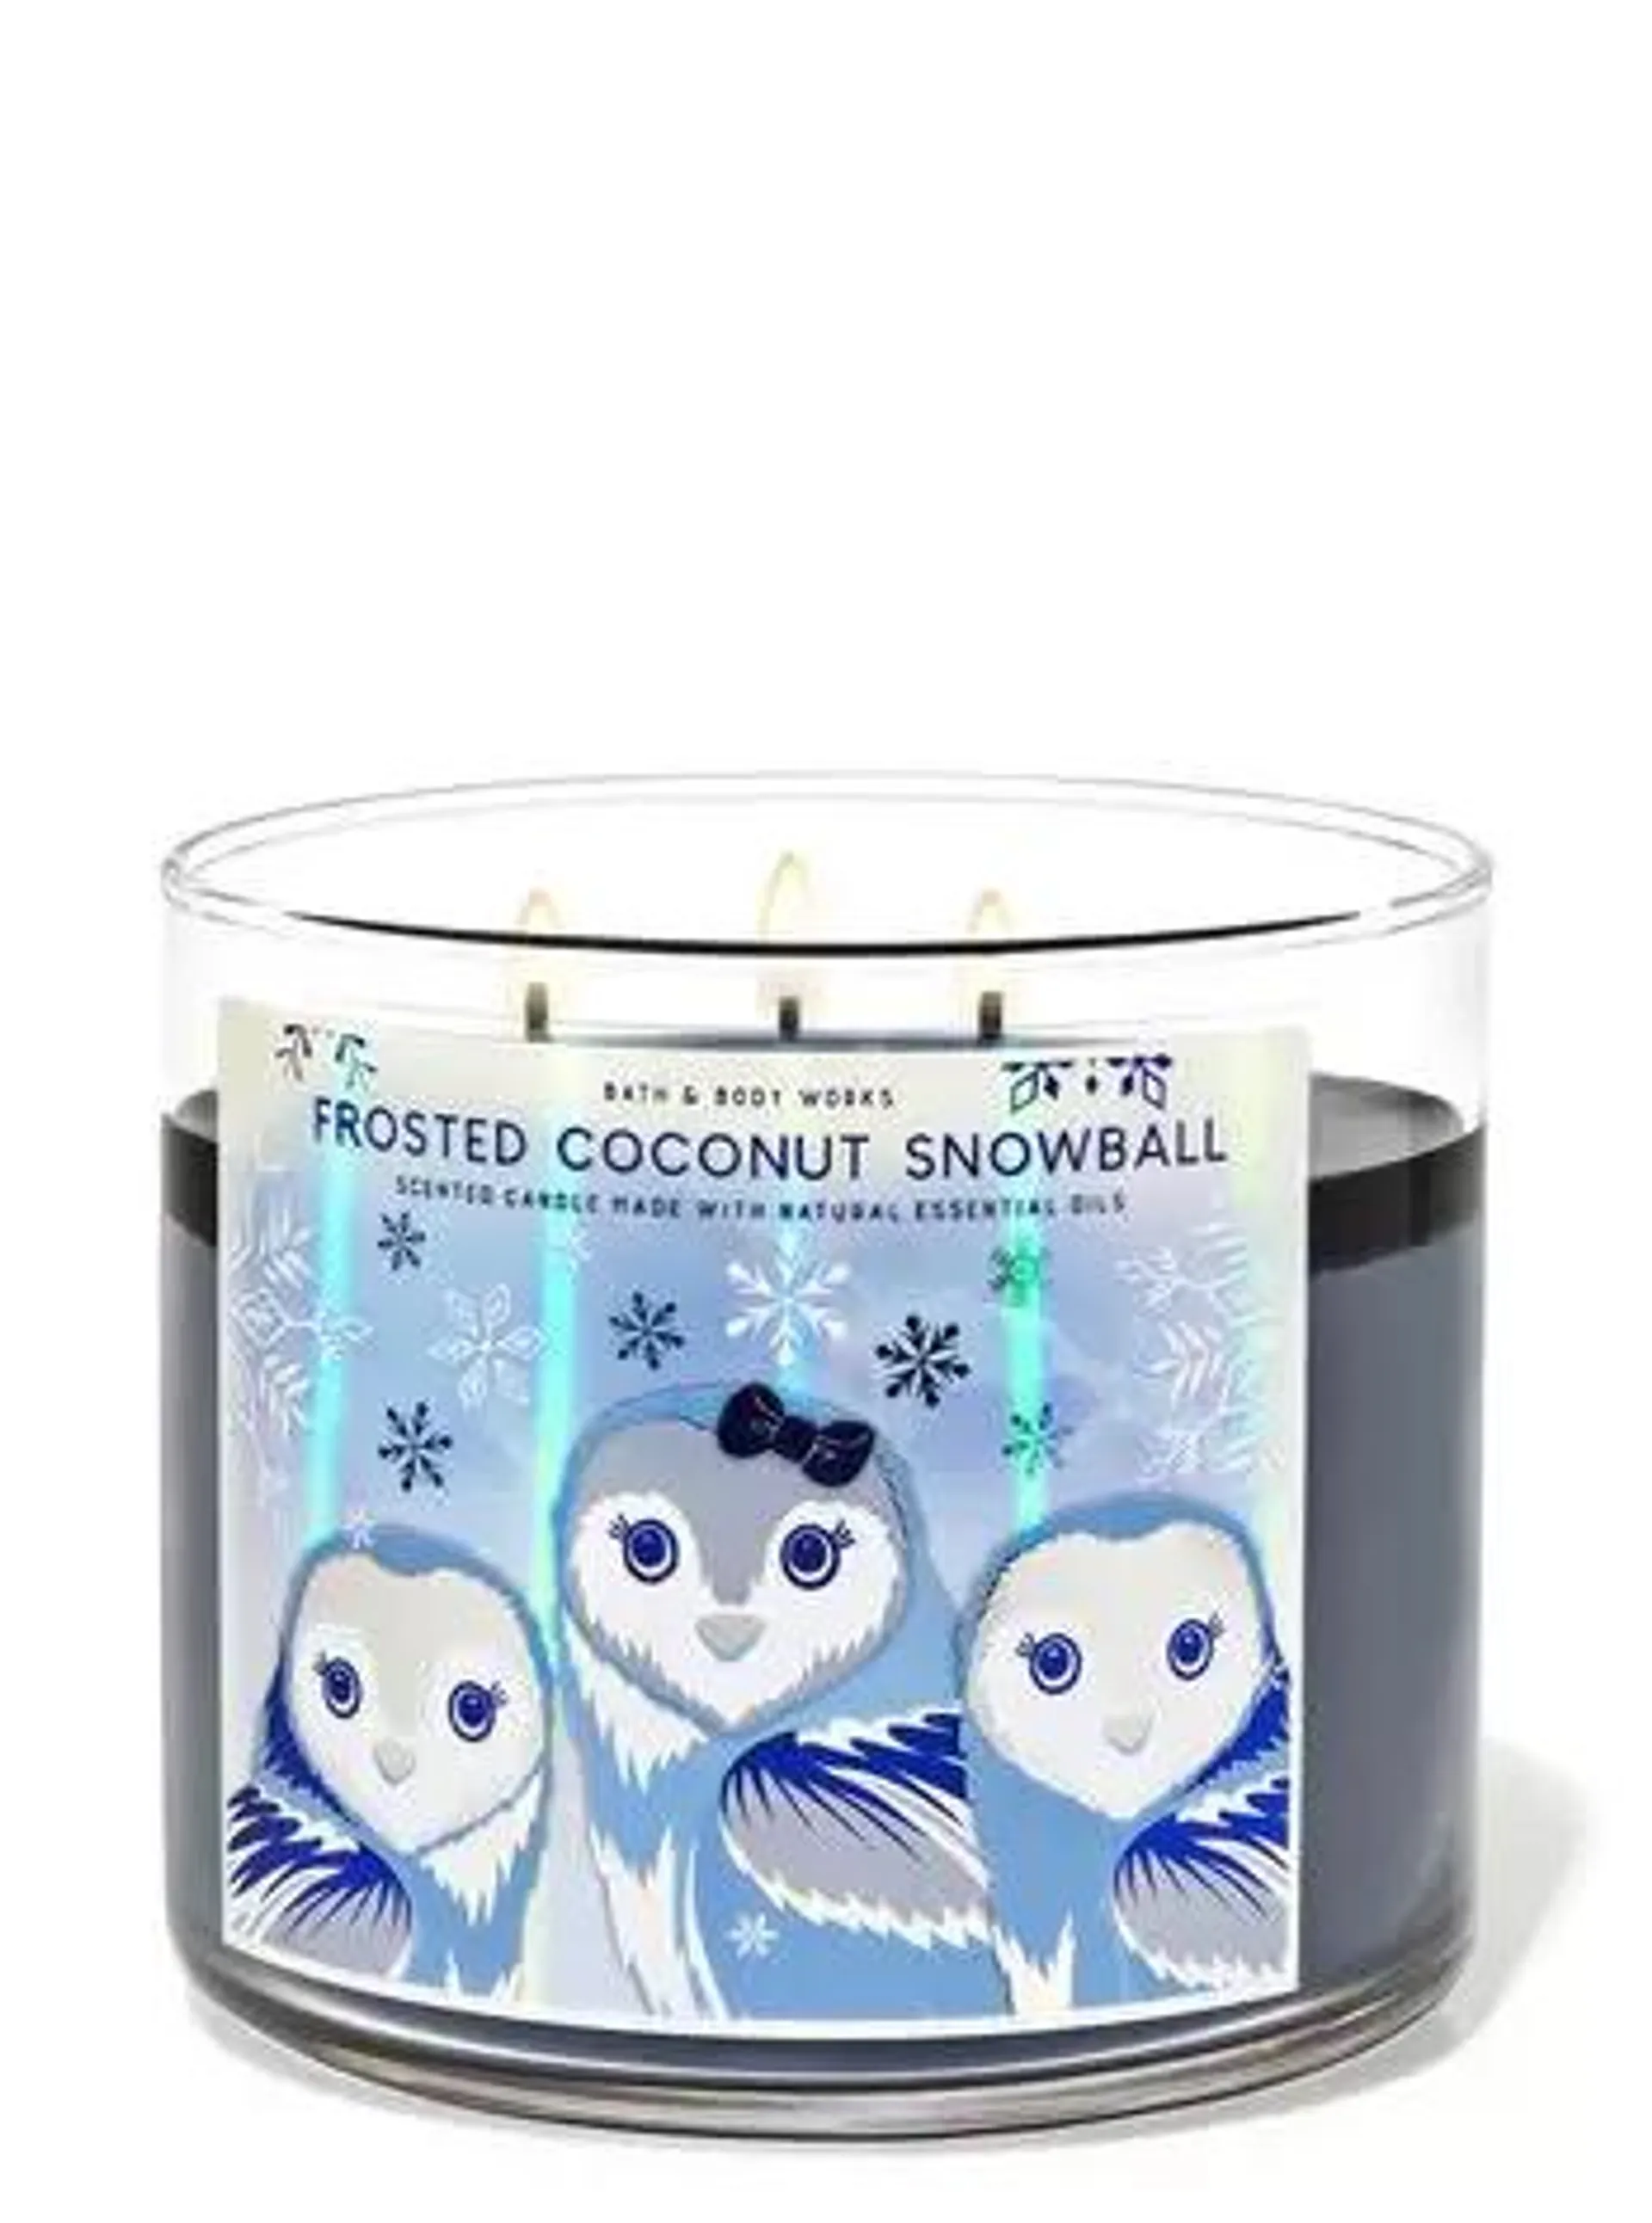 Frosted Coconut Snowball 3-Wick Candle